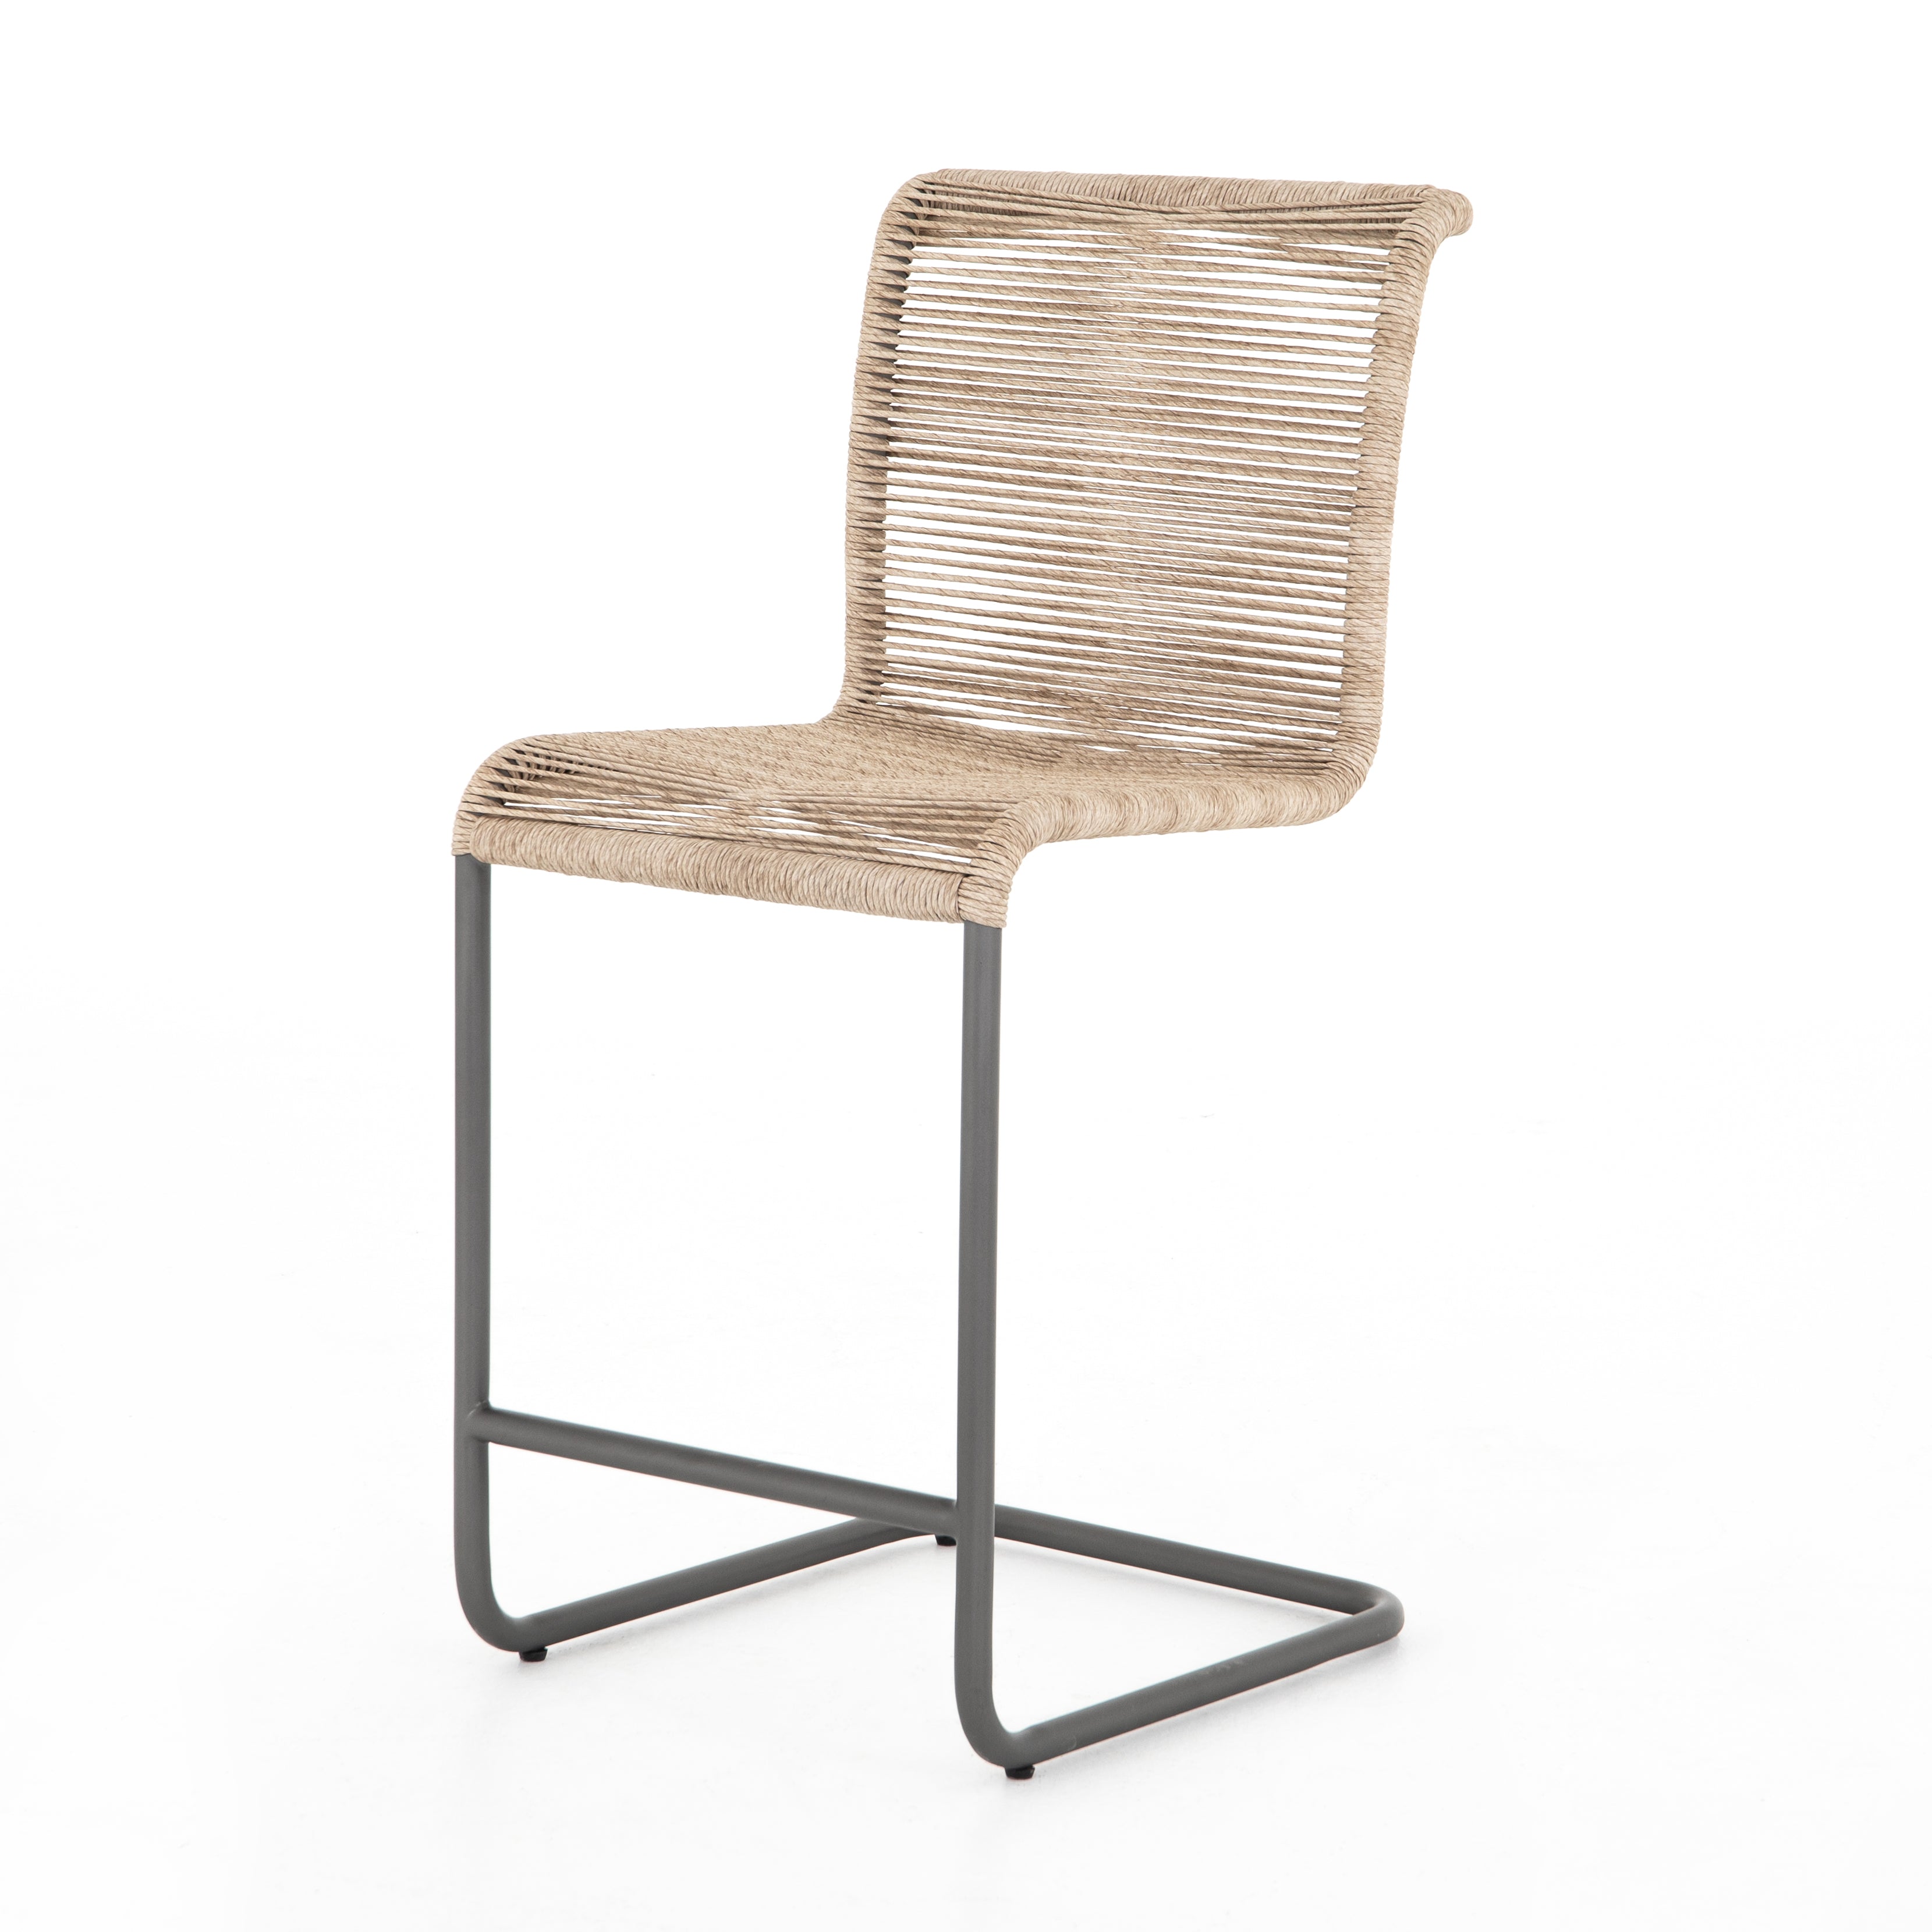 The Grover Outdoor Bar + Counter Stool has an attractive curvature that summons a sit. A slim, gunmetal-finished iron frame supports woven all-weather wicker seating in a vintage white, for a textural twist on cantilever-style bar seating. Cover or store indoors during inclement weather and when not in use.